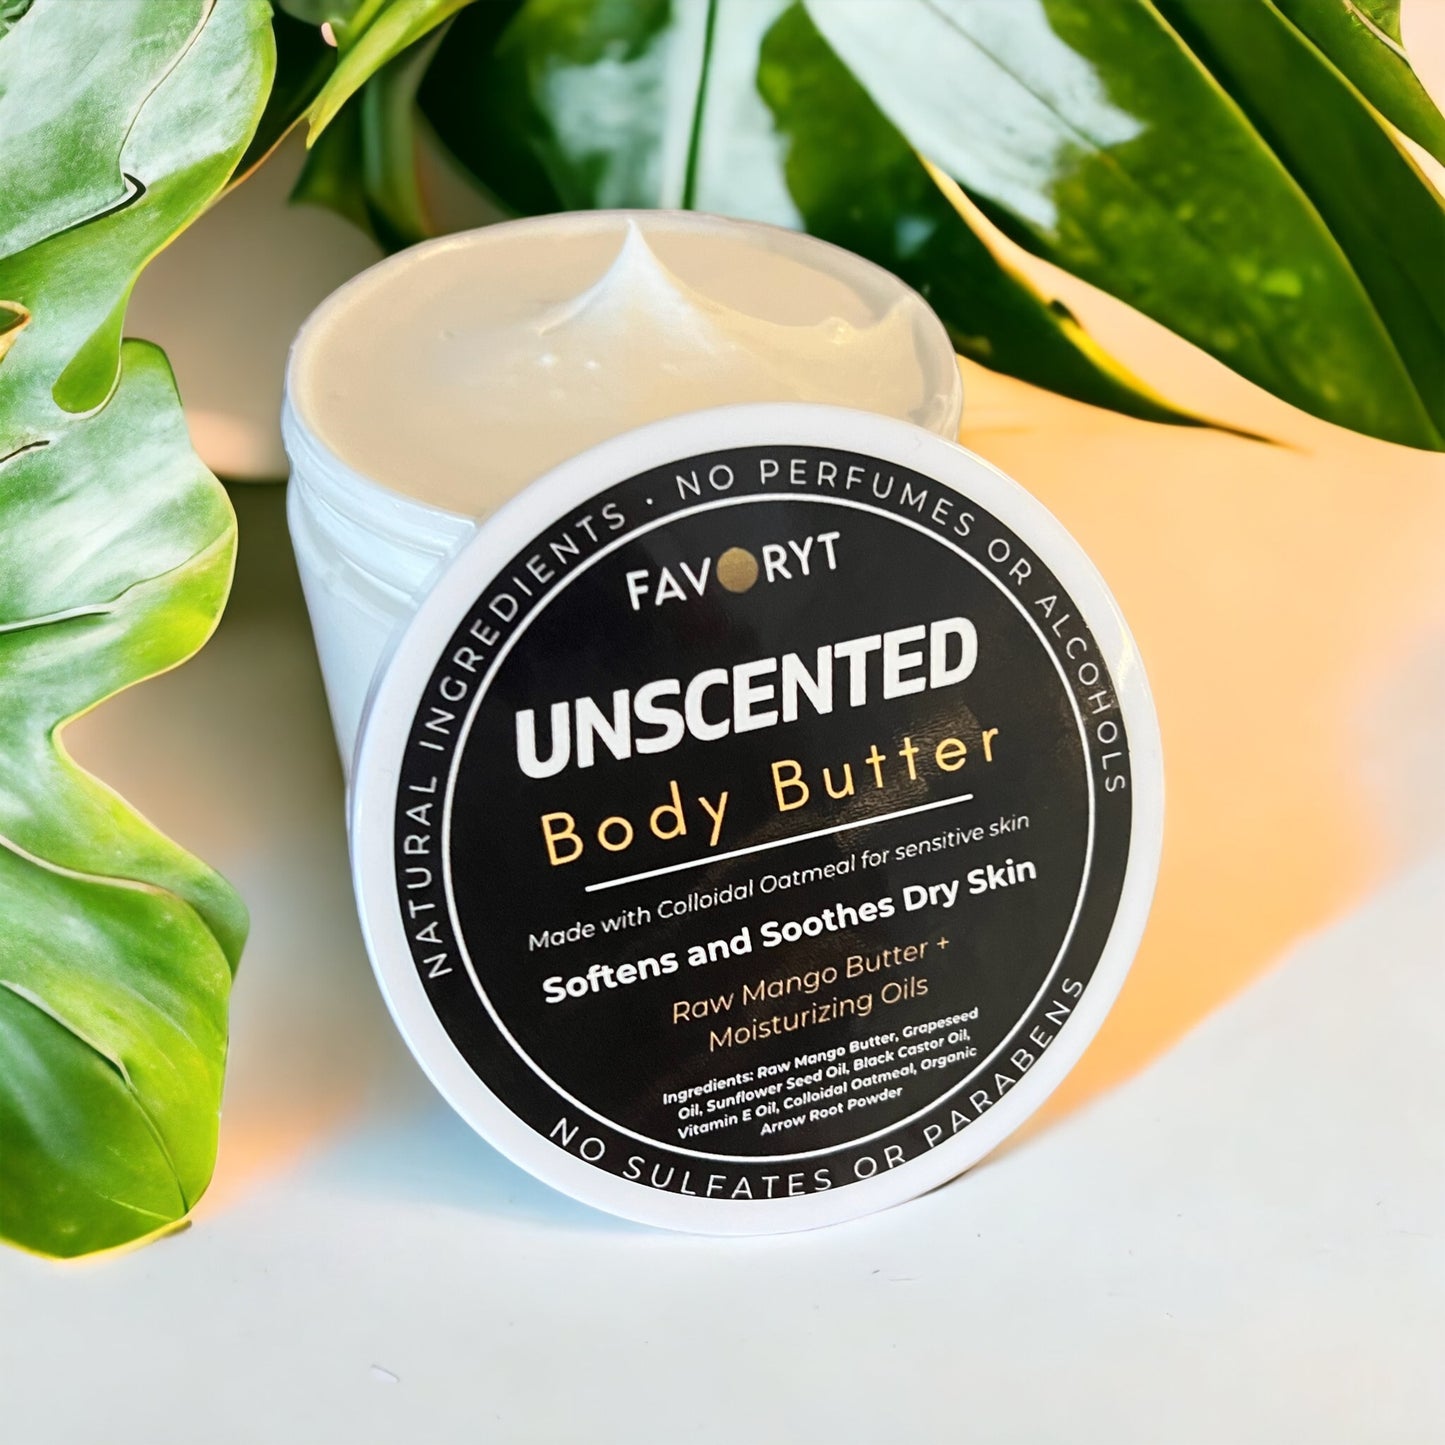 FAVORYT Unscented Body Butter